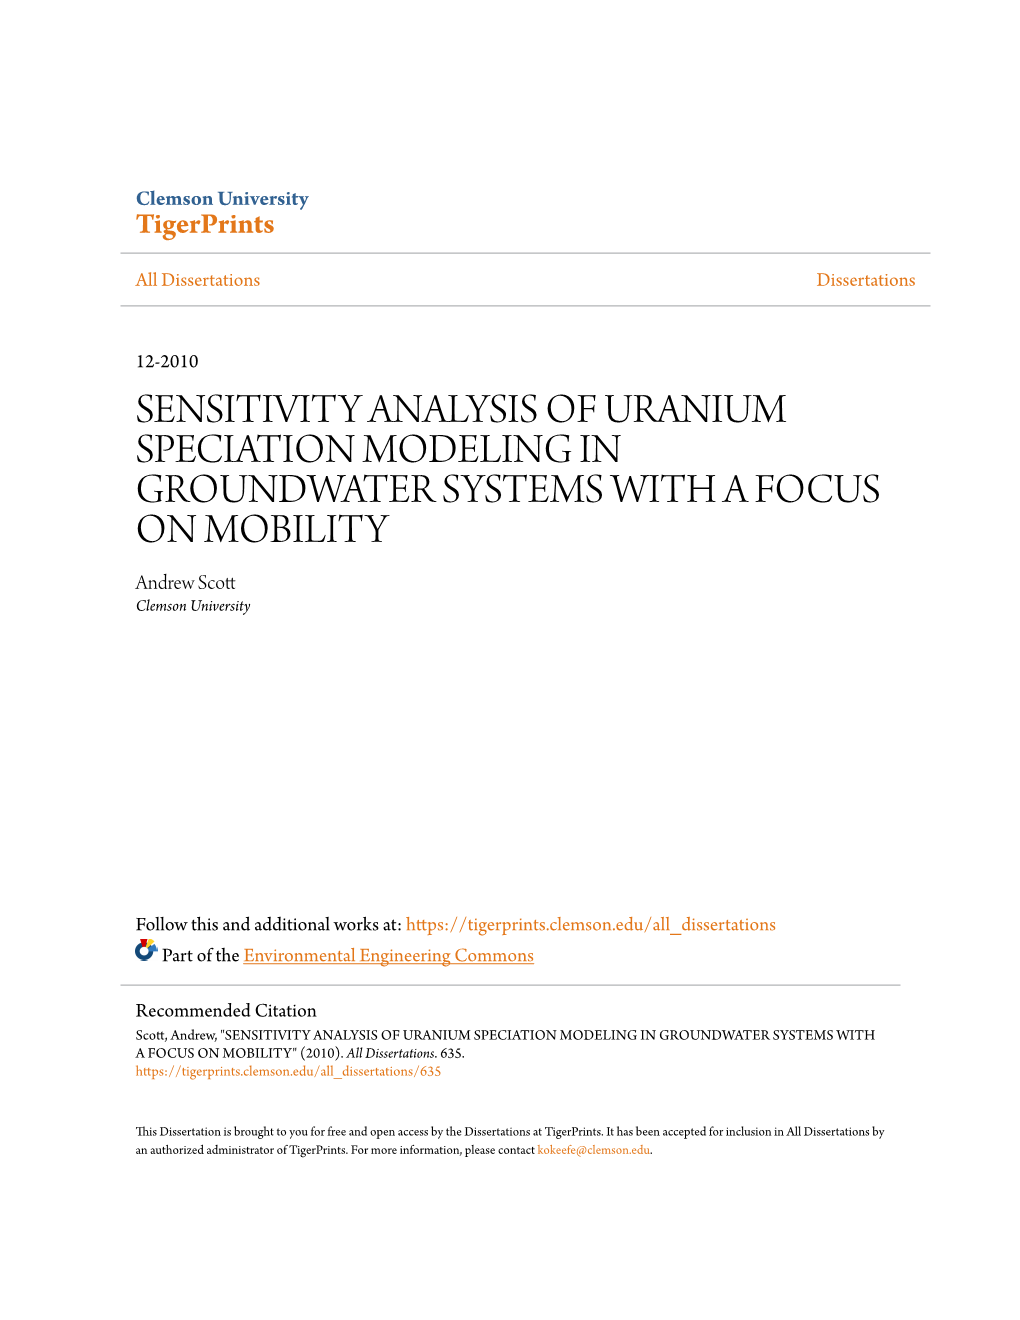 SENSITIVITY ANALYSIS of URANIUM SPECIATION MODELING in GROUNDWATER SYSTEMS with a FOCUS on MOBILITY Andrew Scott Clemson University